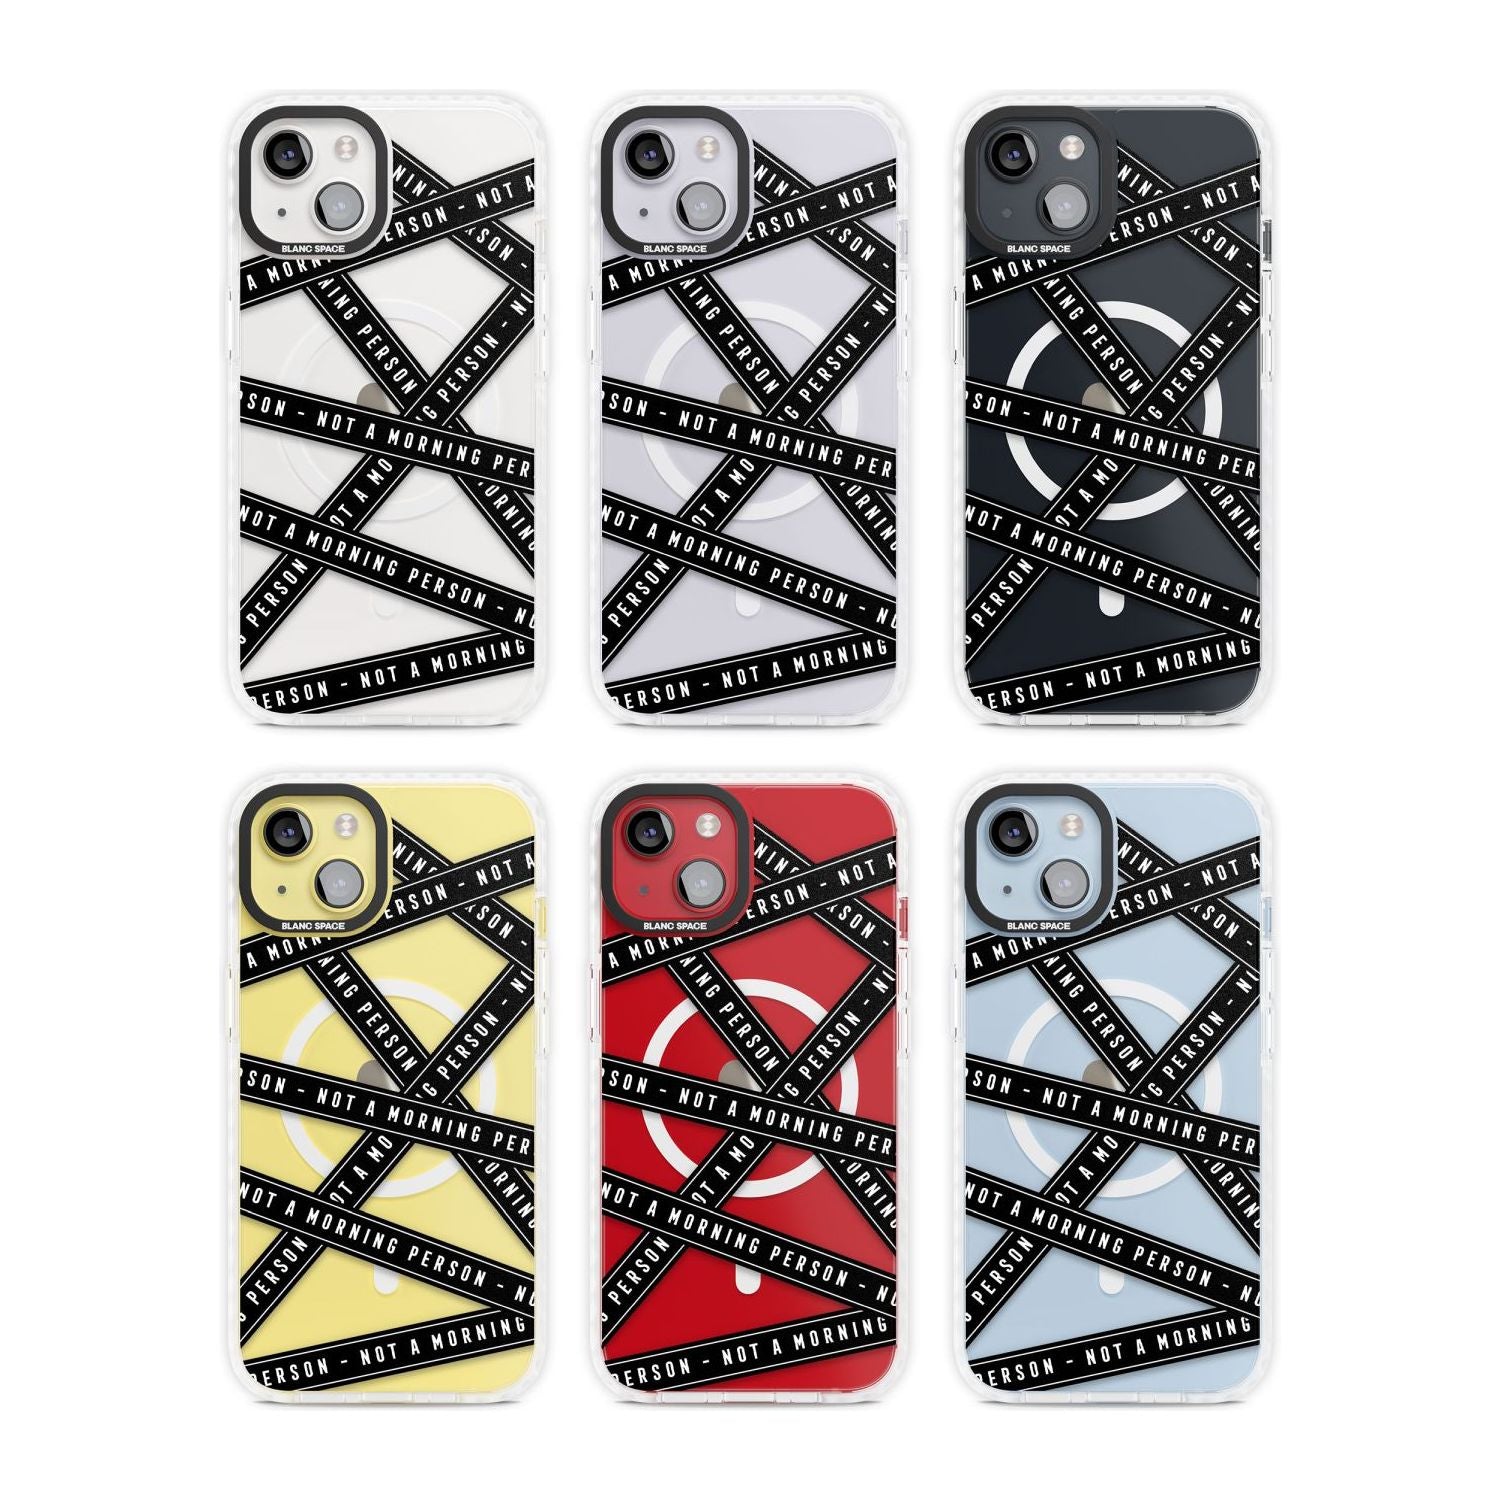 Caution Tape (Clear) Not a Morning Person Phone Case iPhone 15 Pro Max / Black Impact Case,iPhone 15 Plus / Black Impact Case,iPhone 15 Pro / Black Impact Case,iPhone 15 / Black Impact Case,iPhone 15 Pro Max / Impact Case,iPhone 15 Plus / Impact Case,iPhone 15 Pro / Impact Case,iPhone 15 / Impact Case,iPhone 15 Pro Max / Magsafe Black Impact Case,iPhone 15 Plus / Magsafe Black Impact Case,iPhone 15 Pro / Magsafe Black Impact Case,iPhone 15 / Magsafe Black Impact Case,iPhone 14 Pro Max / Black Impact Case,iP